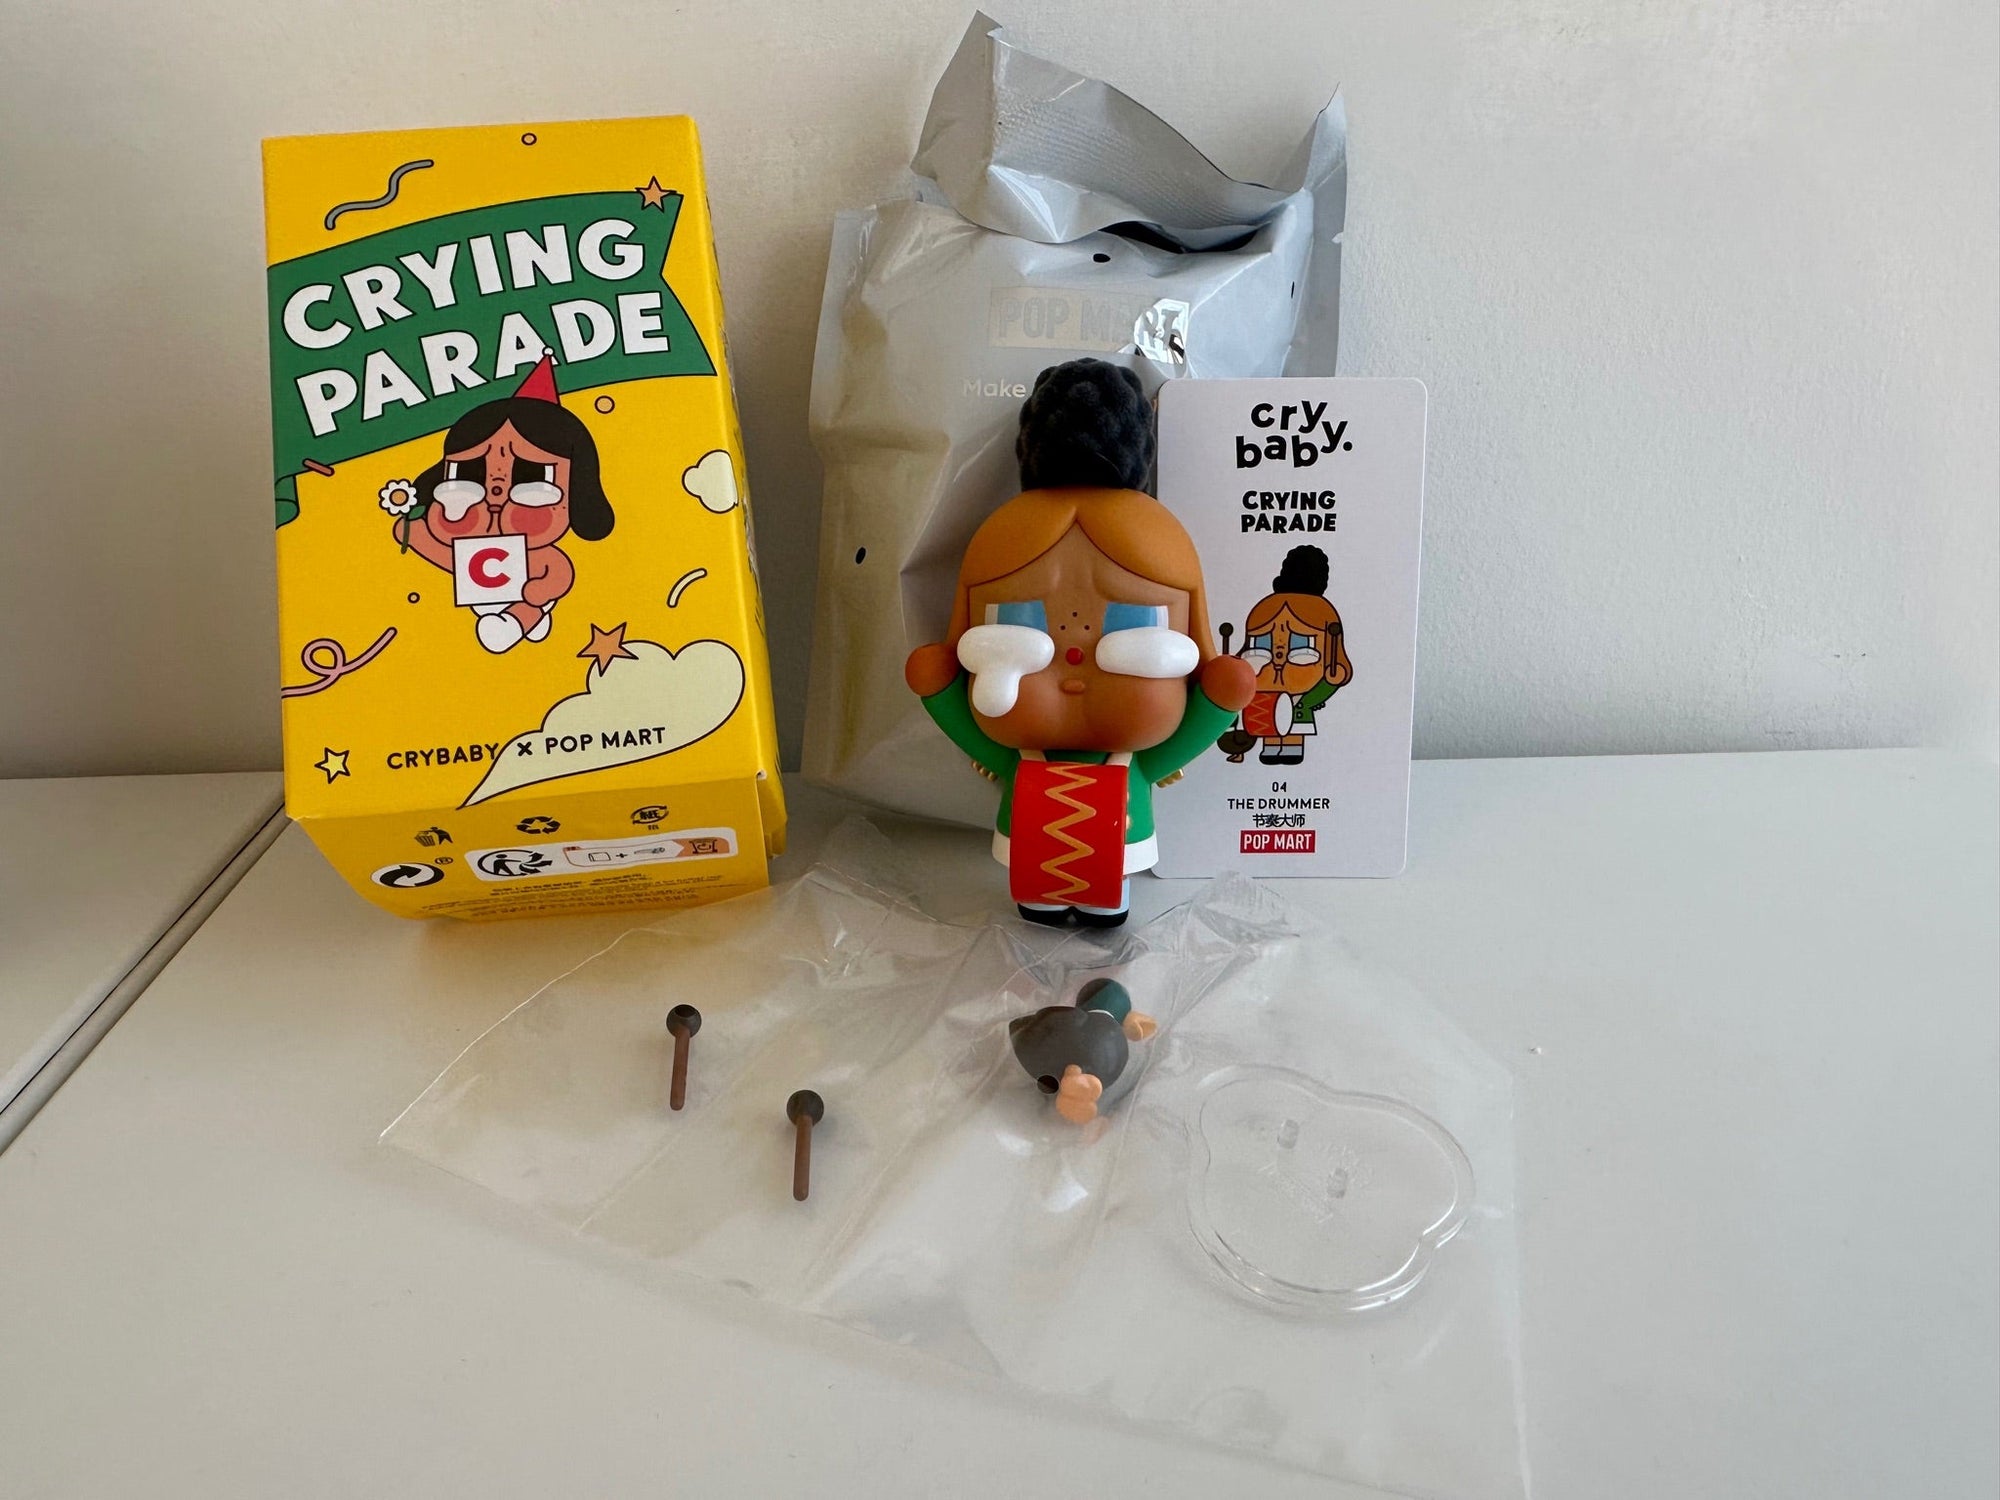 THE DRUMMER - CRYBABY Crying Parade Series by POP MART - 1